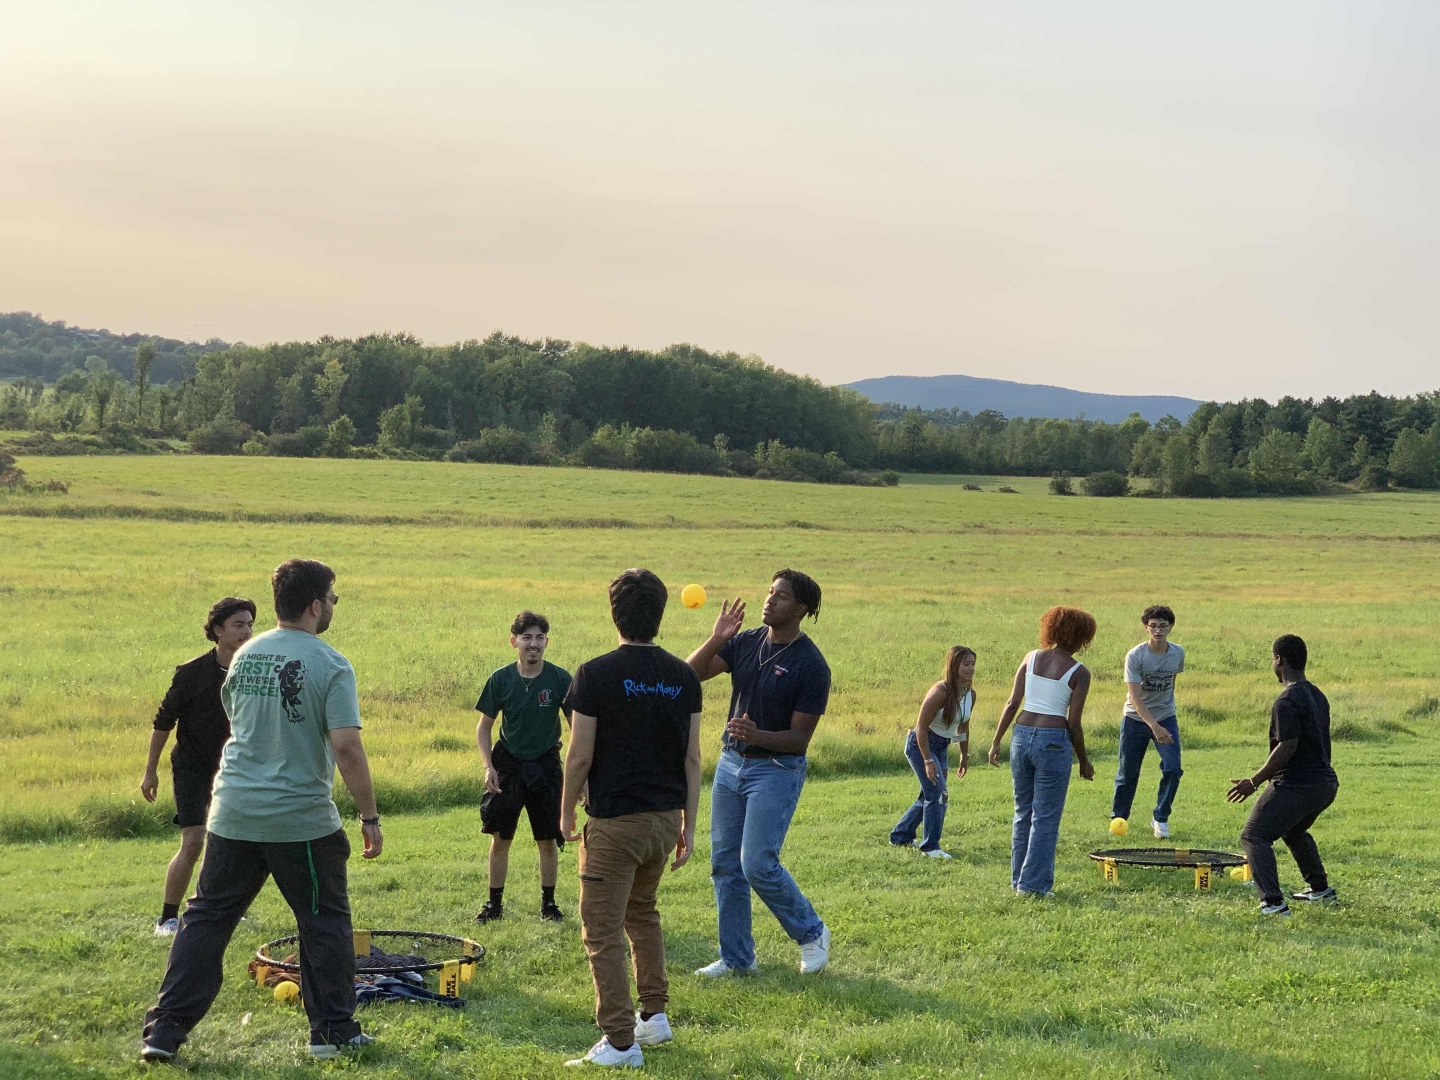 A group of students playing outdoor games in a field.